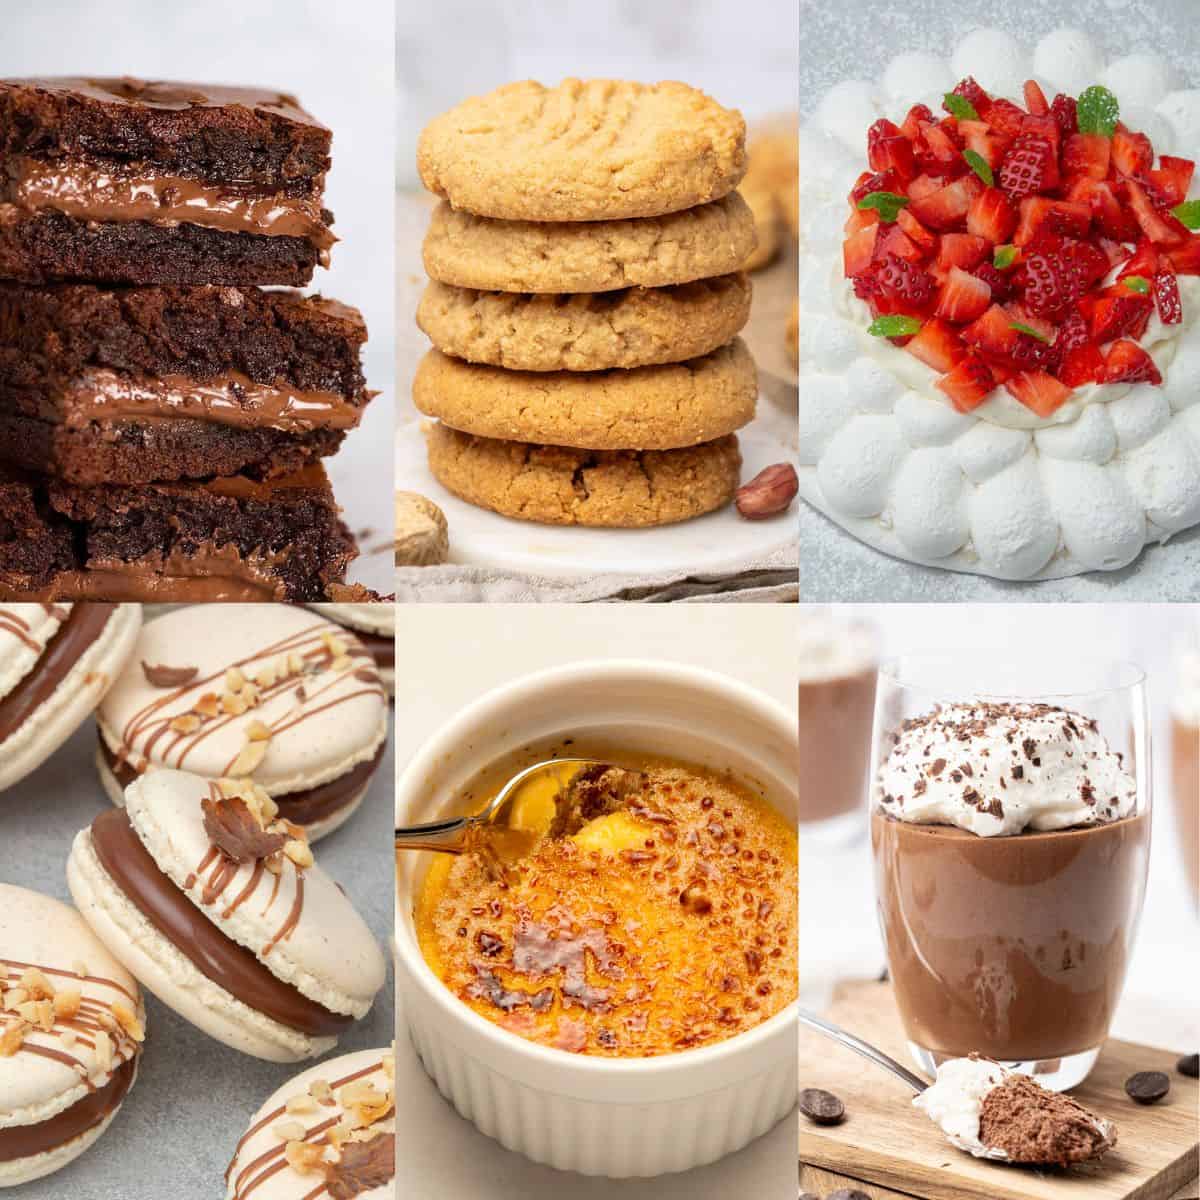 <p>The best <a href="https://www.spatuladesserts.com/flourless-desserts/">flourless desserts</a> to make when you want something tasty and without substitutions. This list of flourless desserts has everything you need, from cakes and cookies to mousse and ice cream.</p><p><strong>Go to the recipes: <a href="https://www.spatuladesserts.com/flourless-desserts/">Flourless Desserts</a></strong></p>